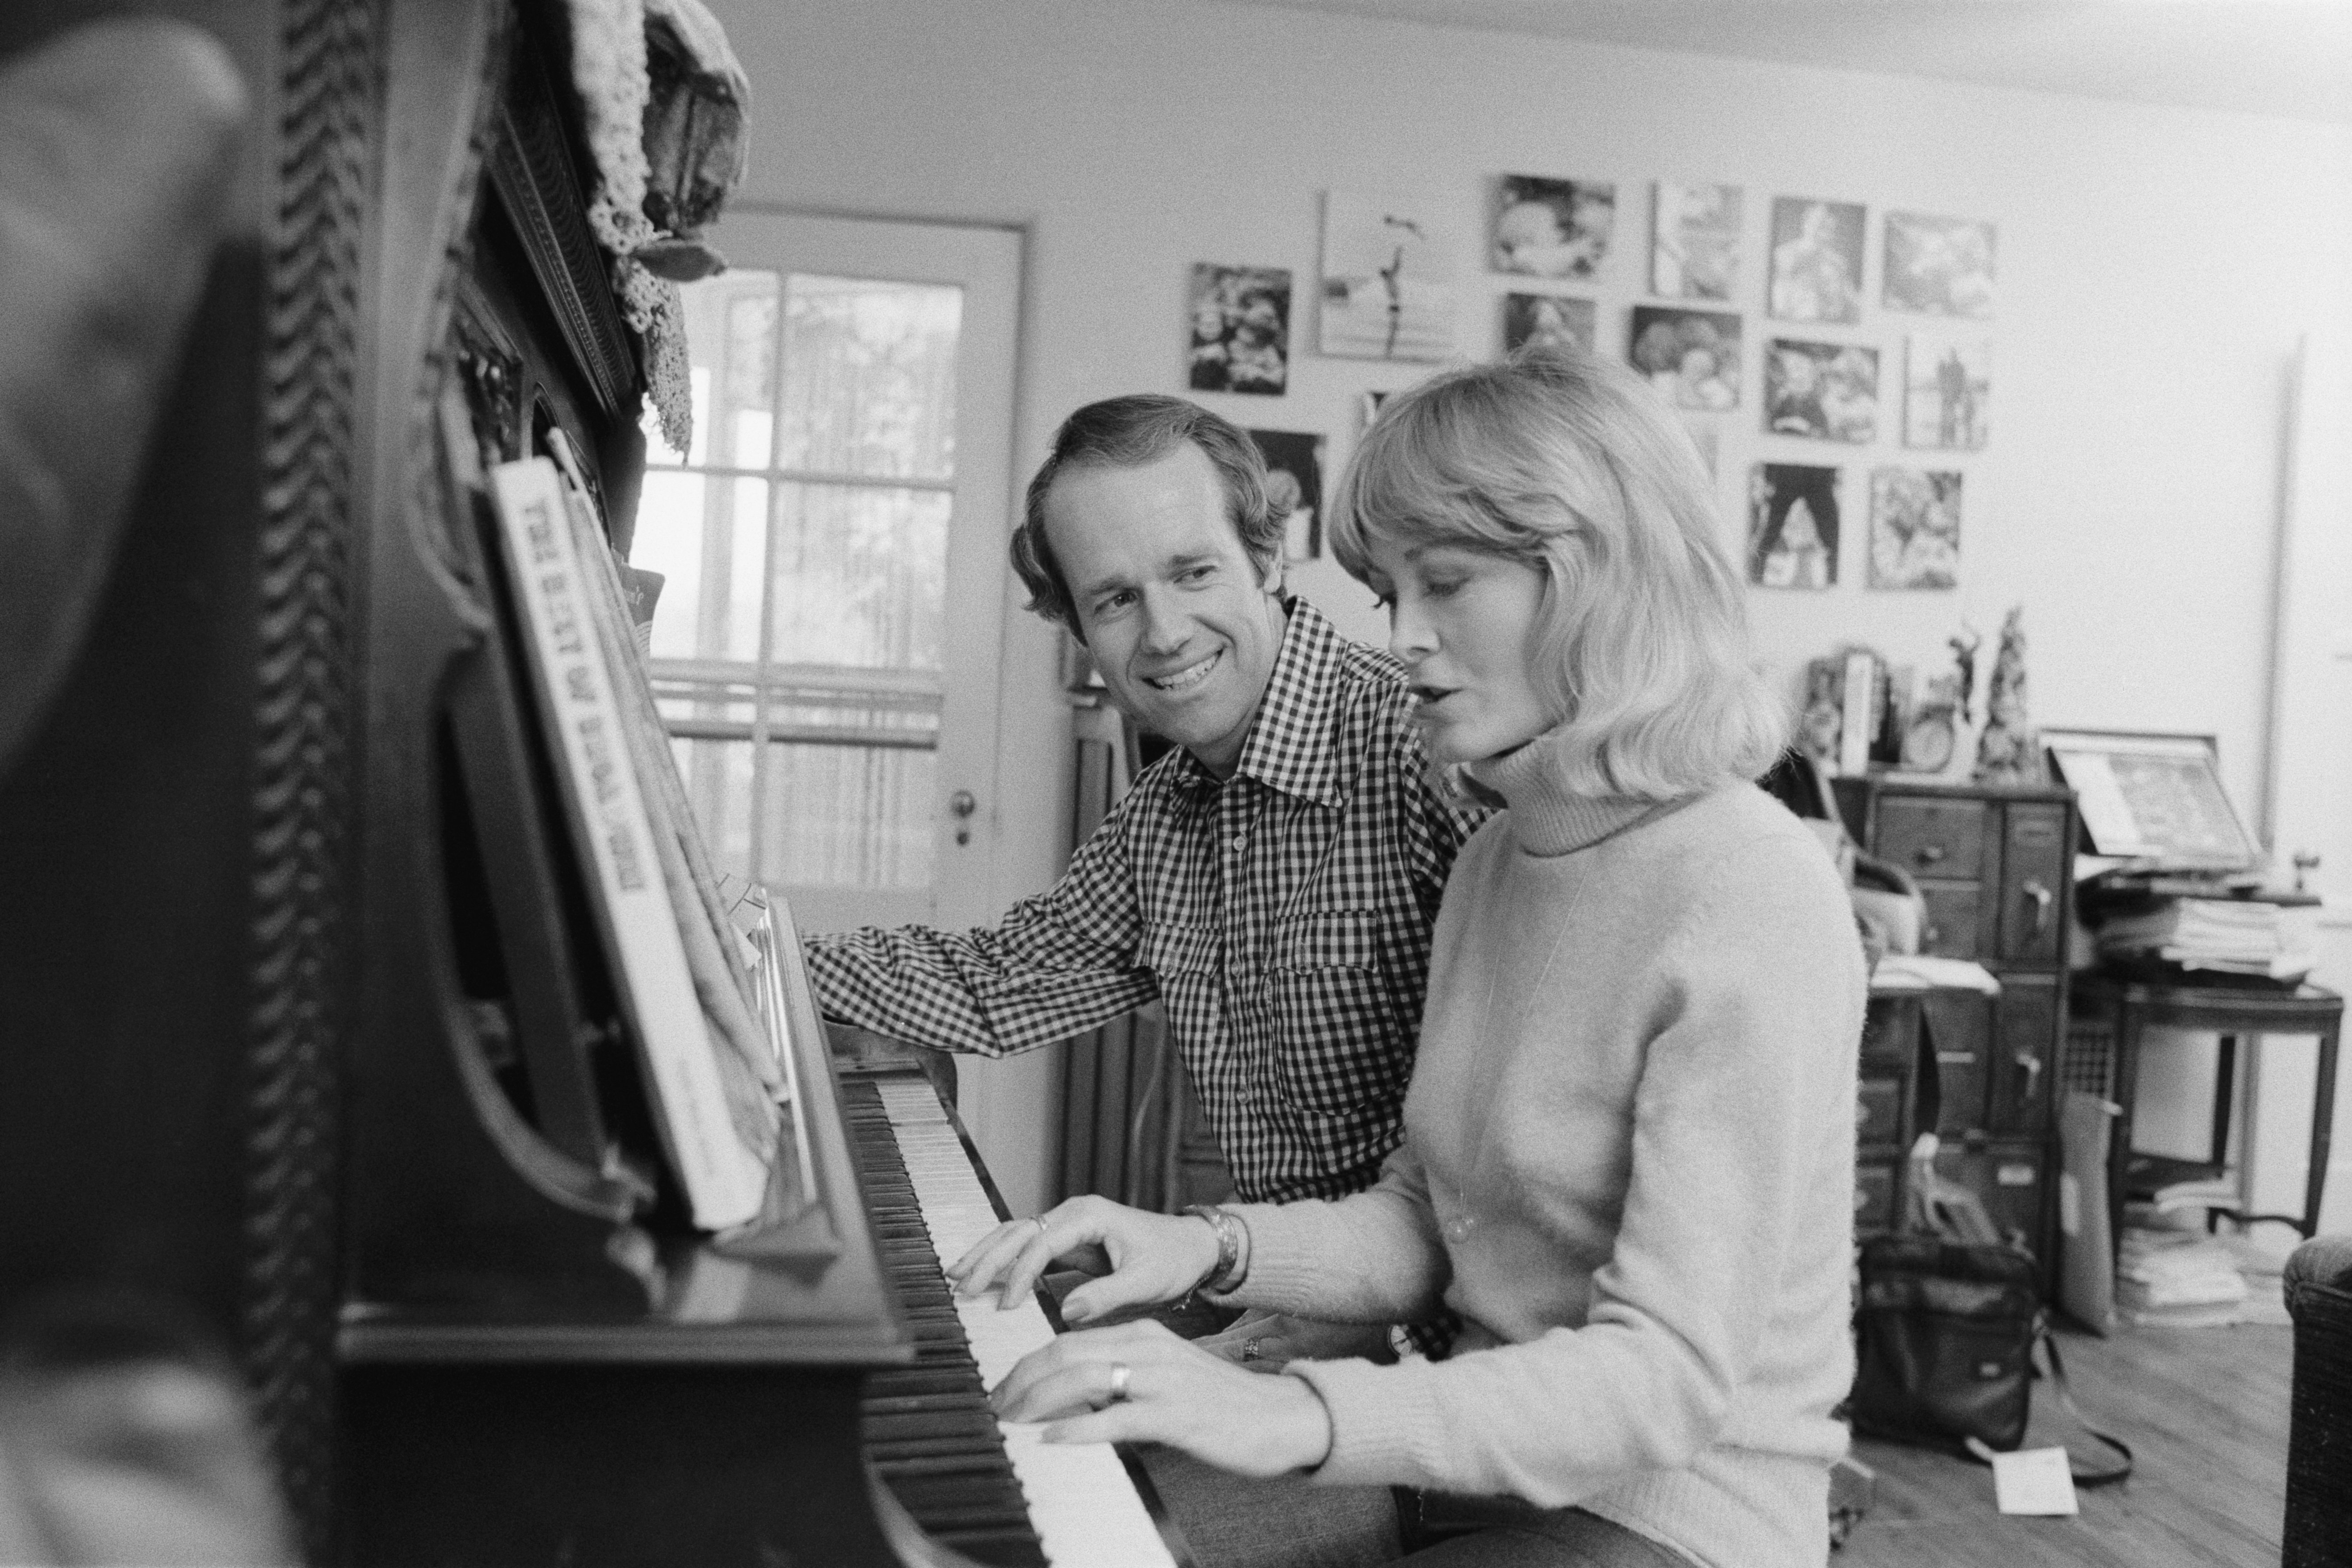 Mike Farrell pictured at home with his wife Judy Farrell playing the piano. / Source: Getty Images